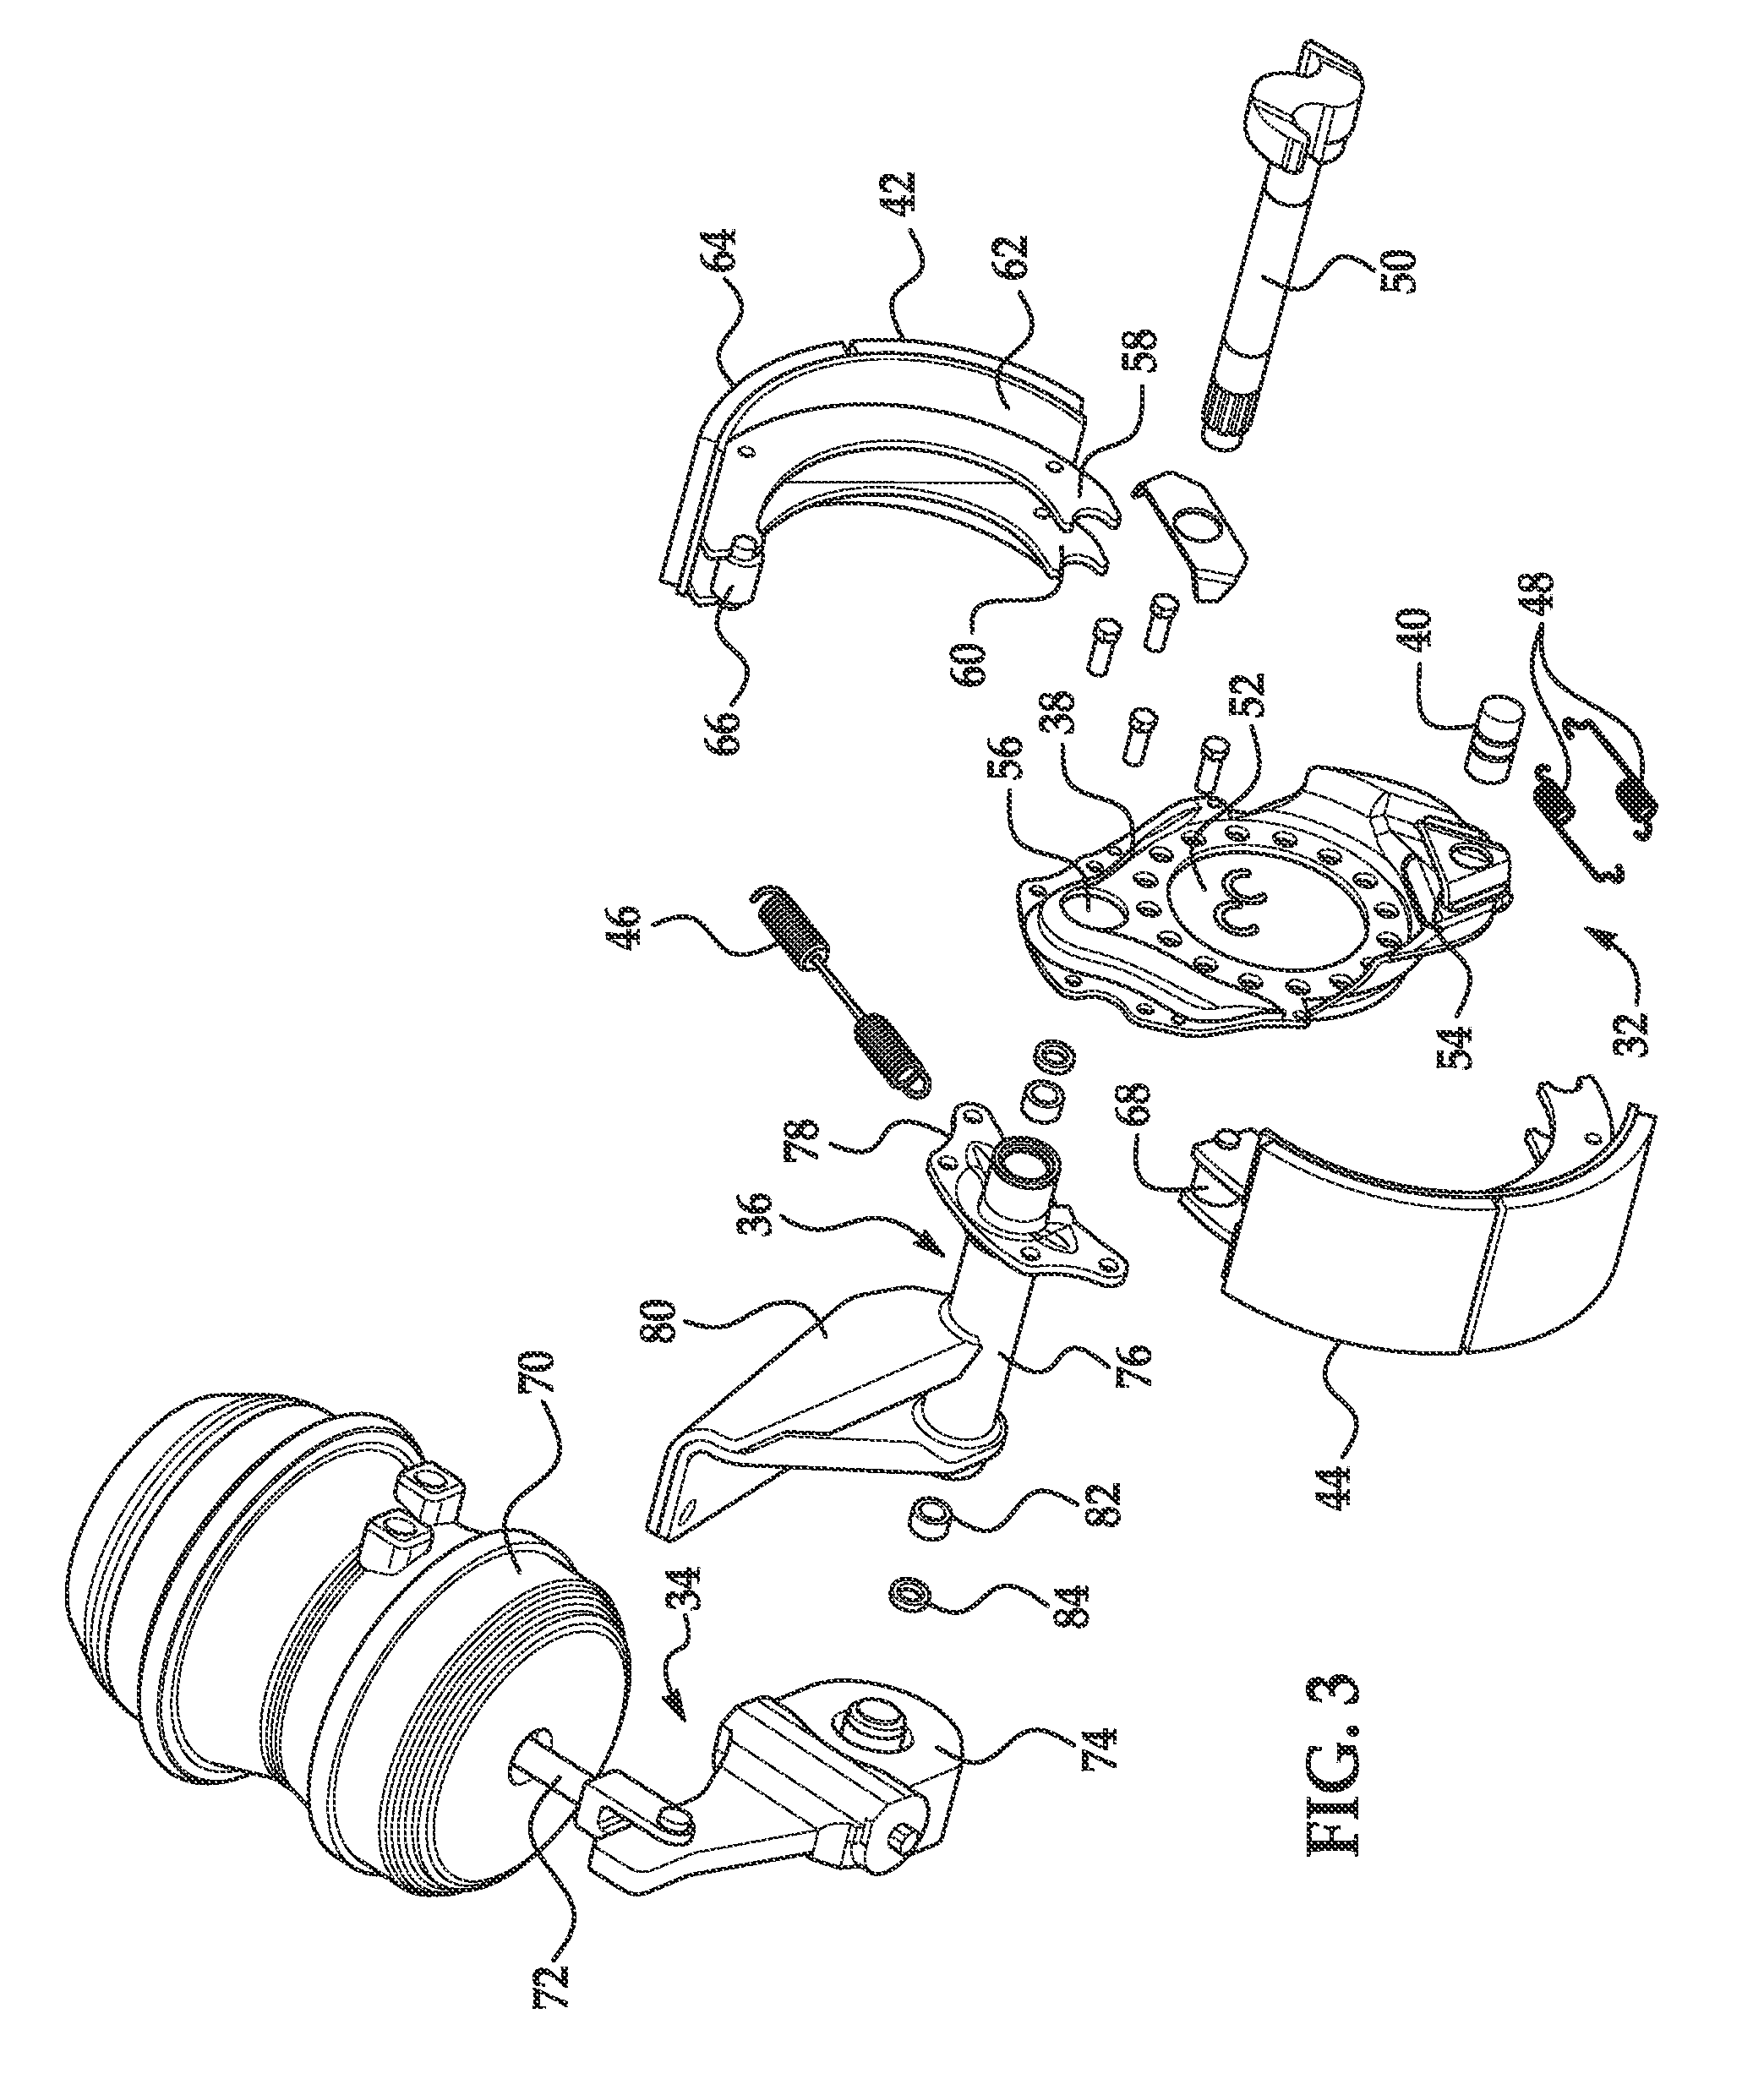 Rigid Bracket Assembly for Mounting a Brake Assembly and Brake Actuator